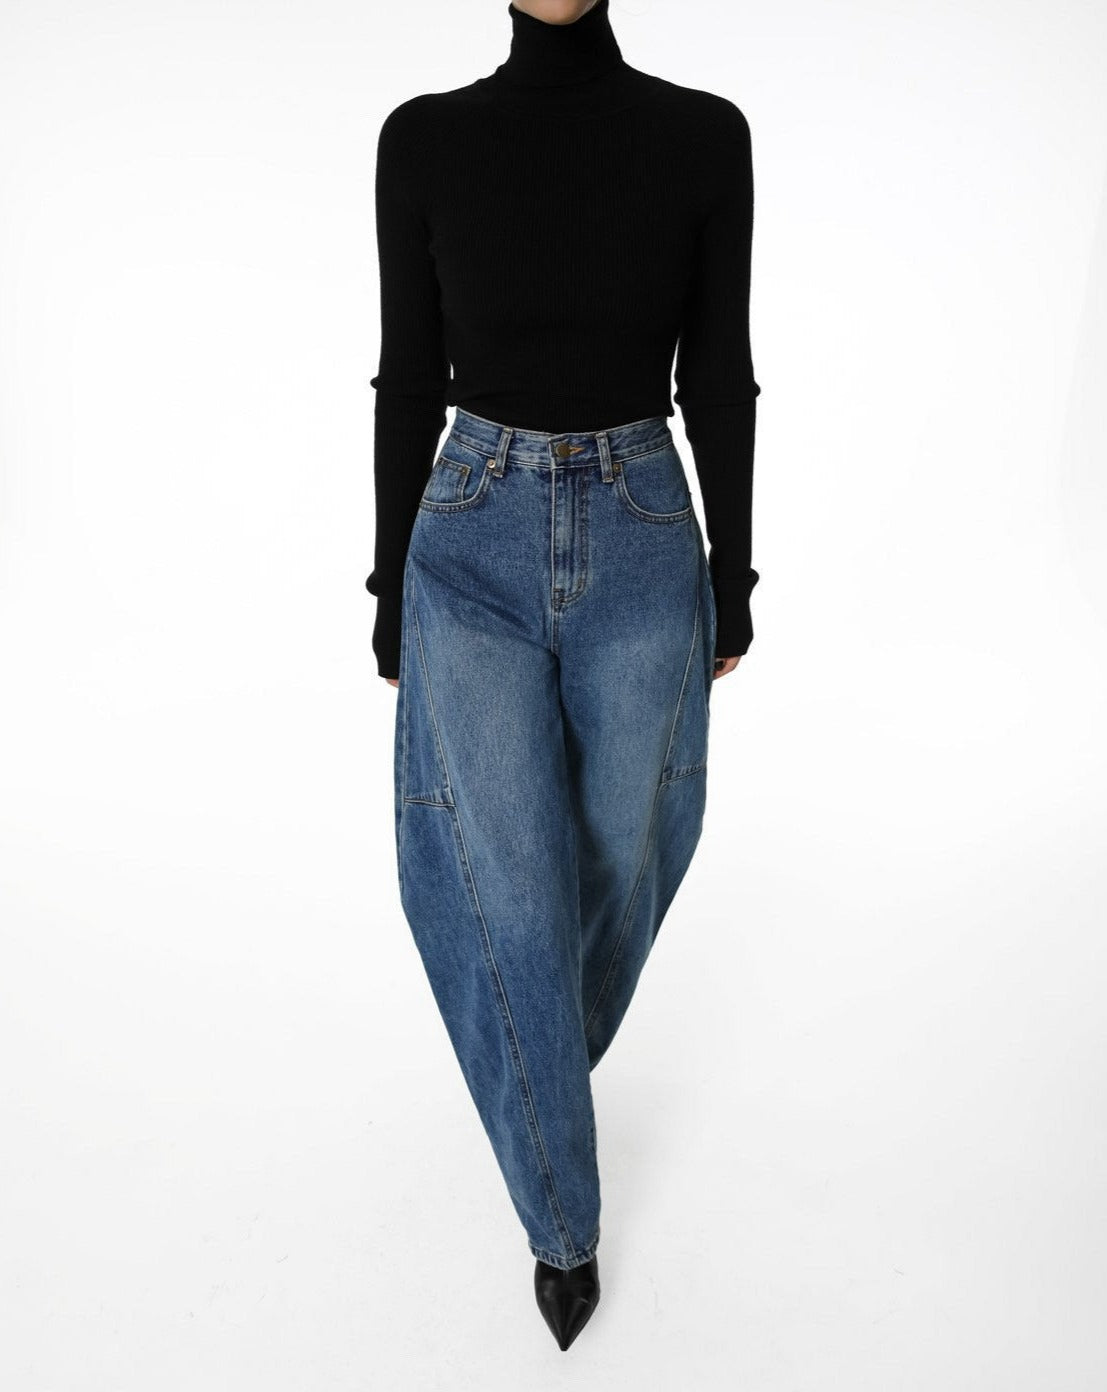 【PAPERMOON 페이퍼 문】AW / Side Stitch Detail Voulme Blue Denim Jeans